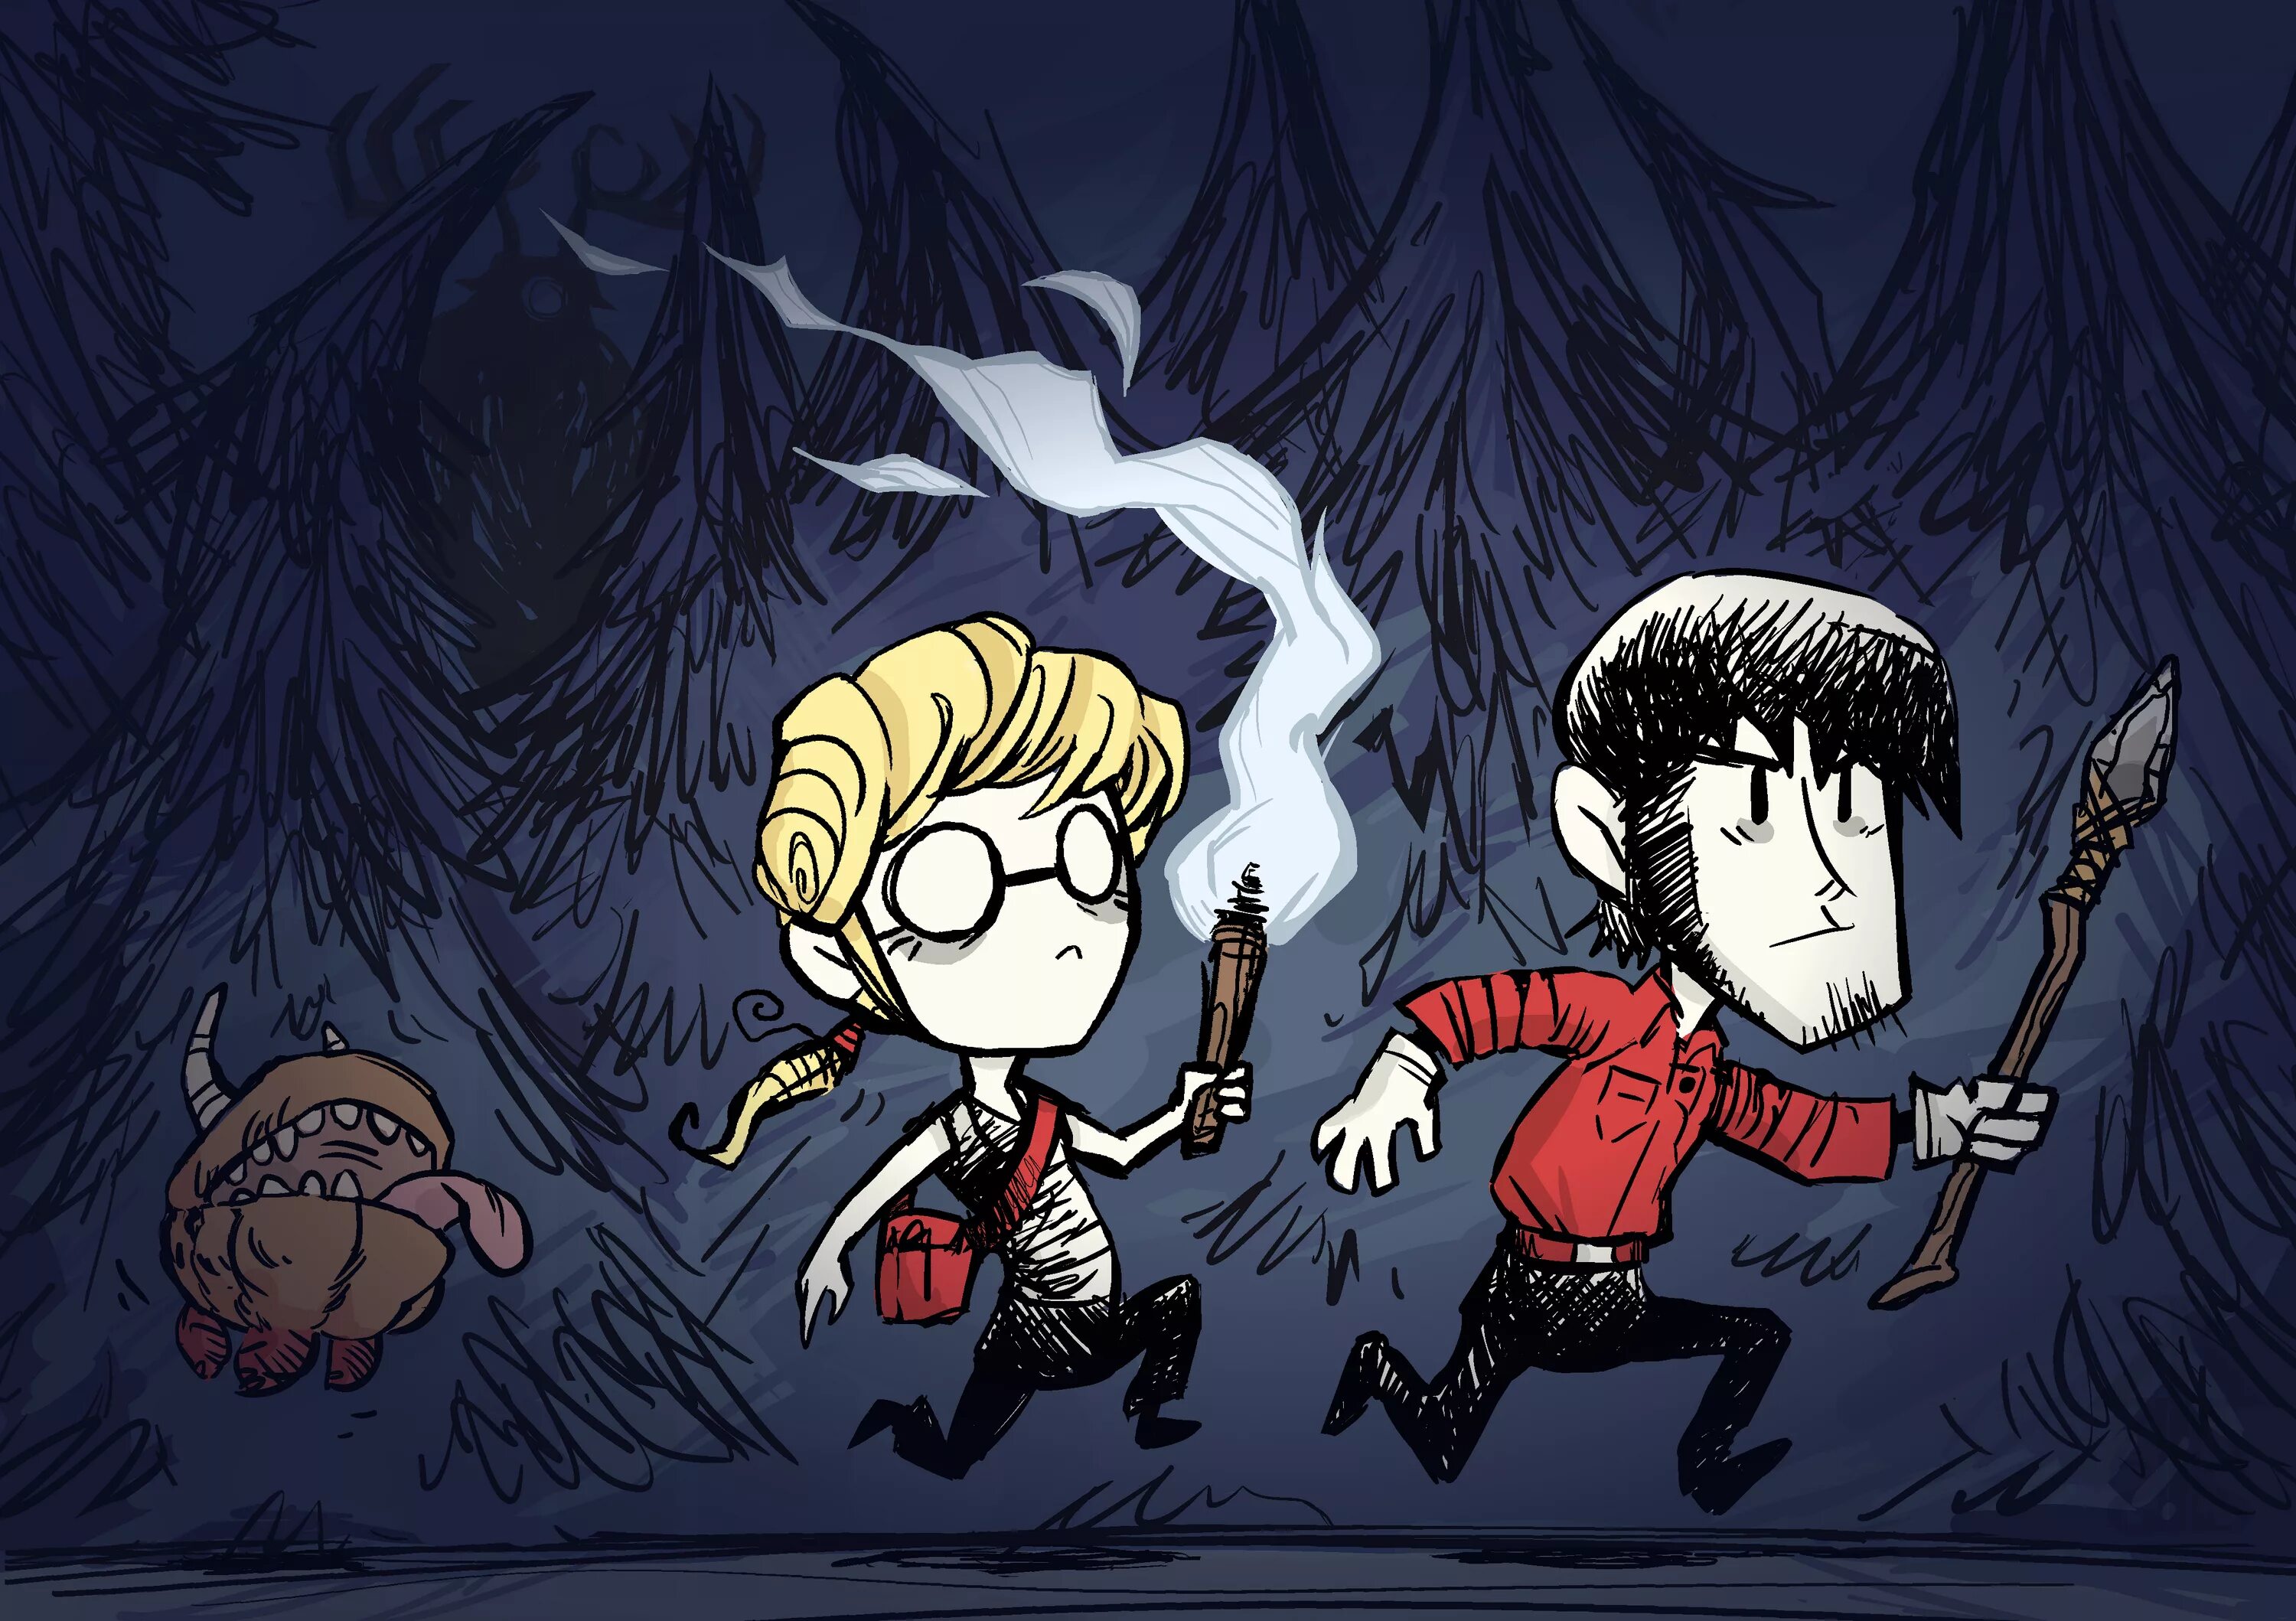 Don't Starve together. Максвелл don't Starve together. Don t Starve together мемы. Don't Starve together ава. Слушать ю донт